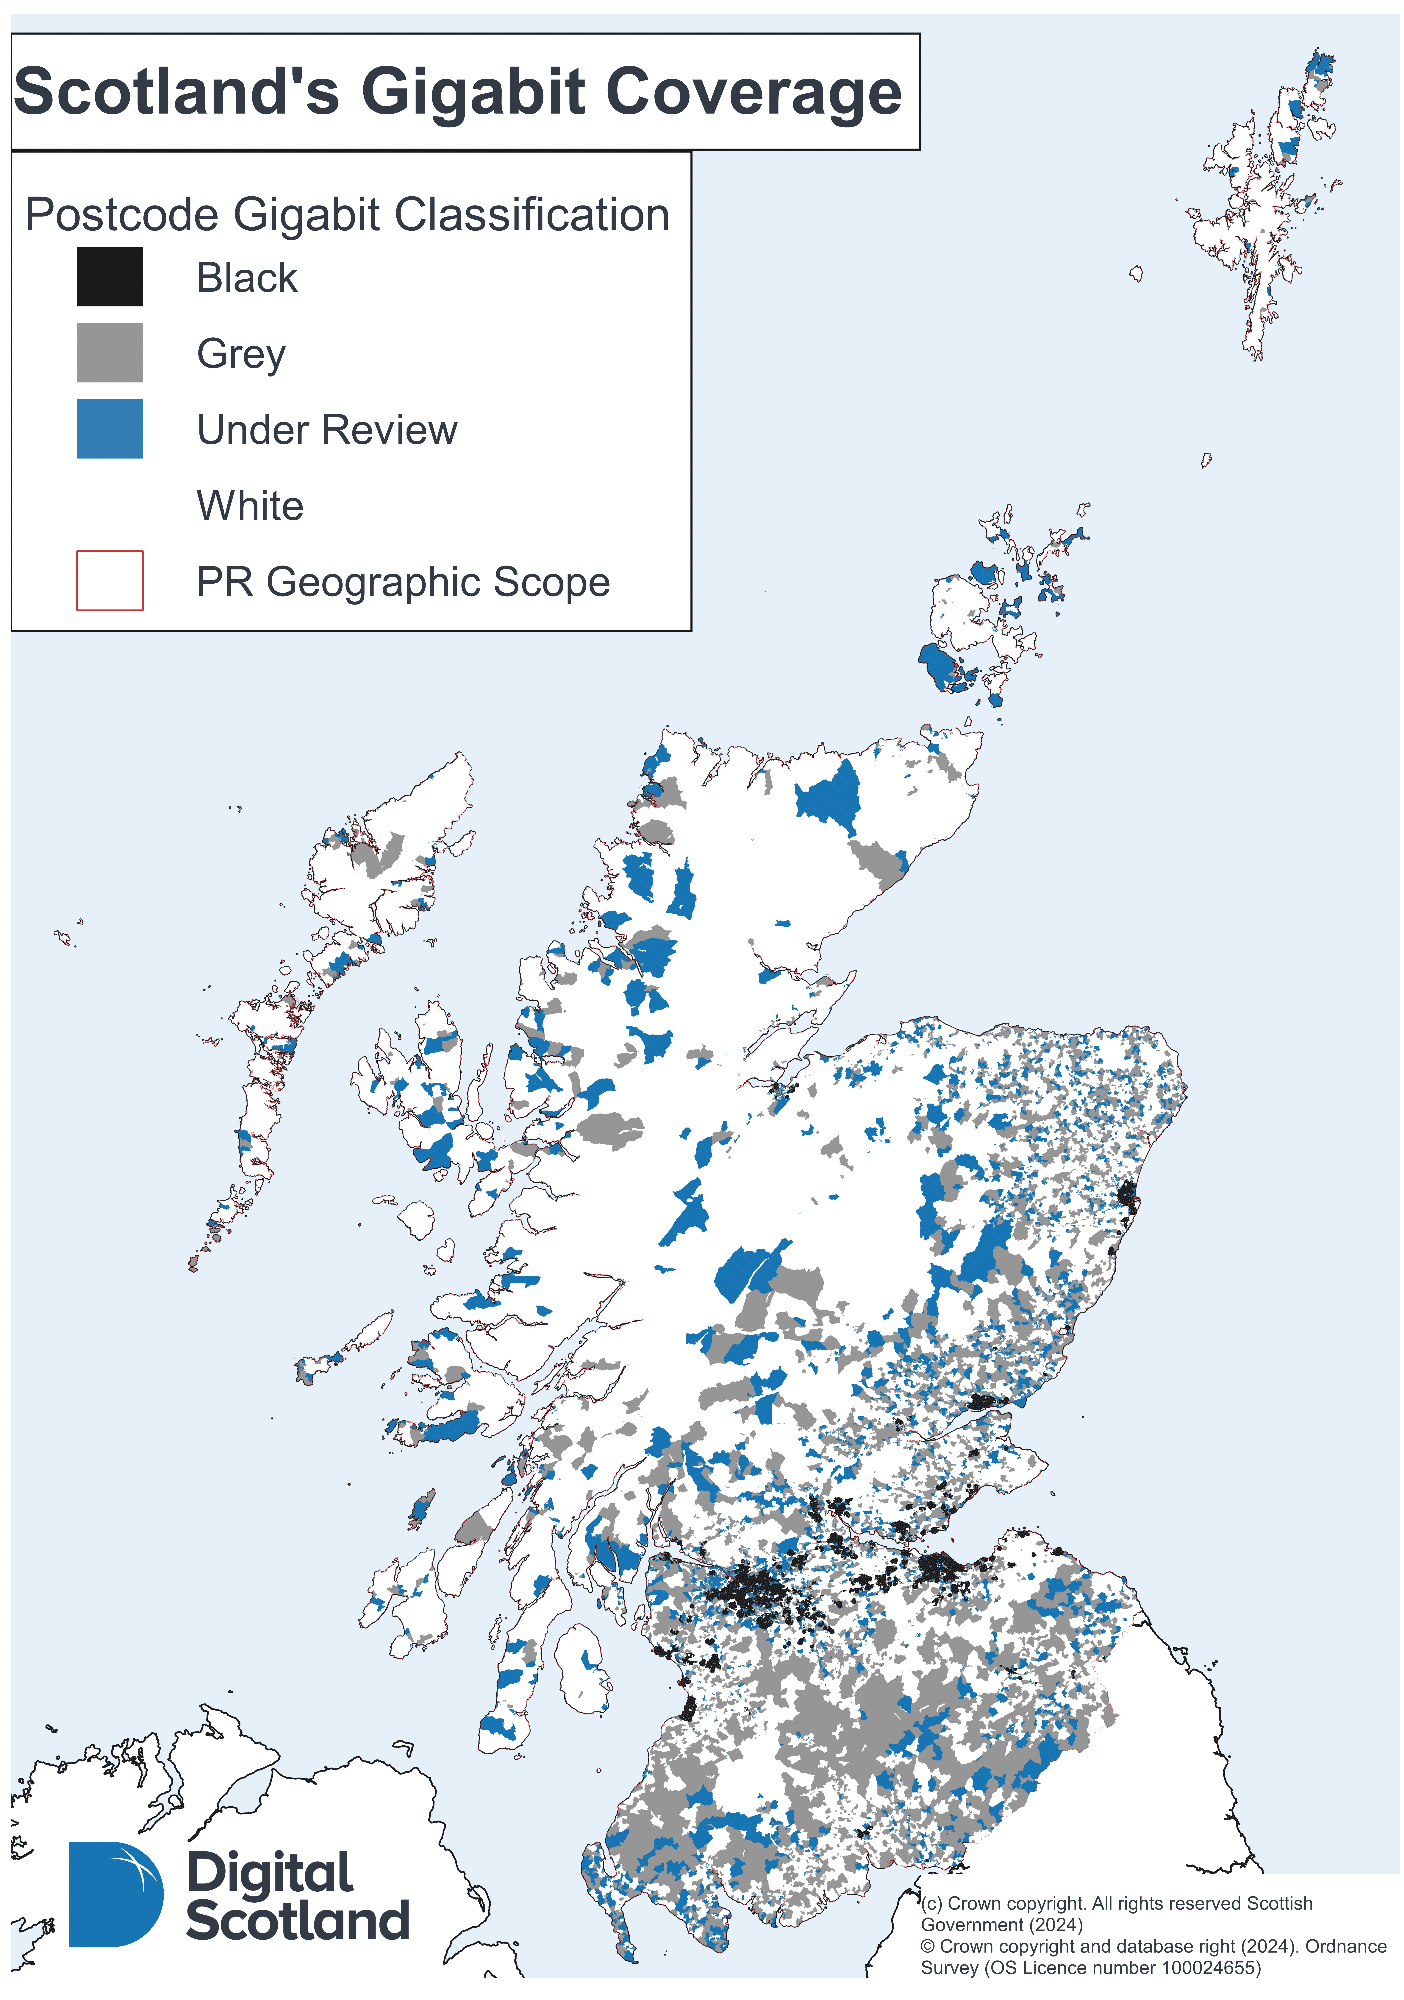 A map of Scotland showing gigabit classifications at postcode level.